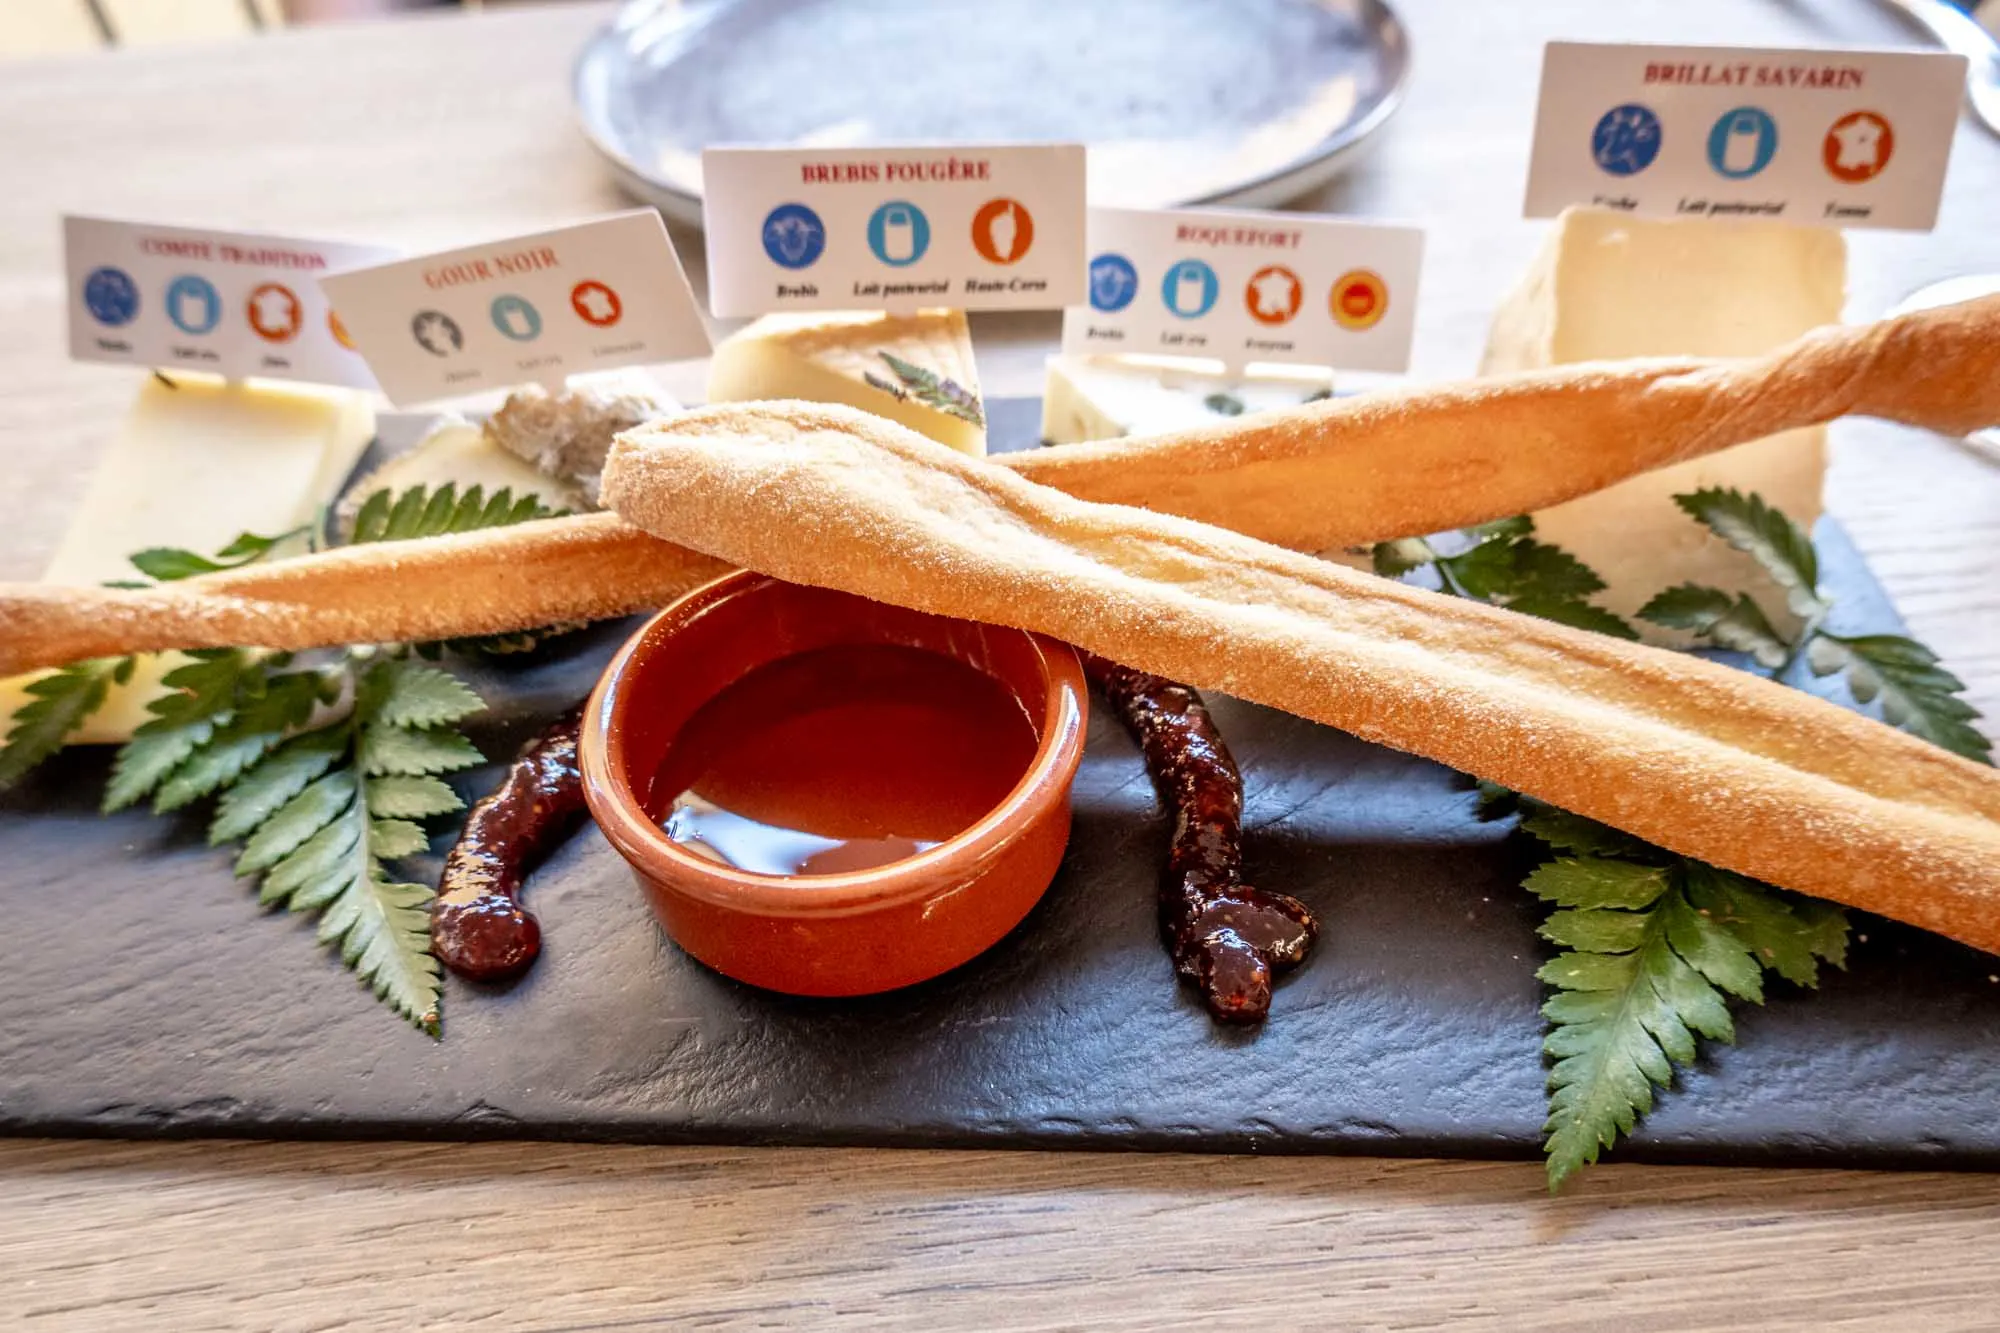 Slate platter with cheeses, jam, and breadsticks.